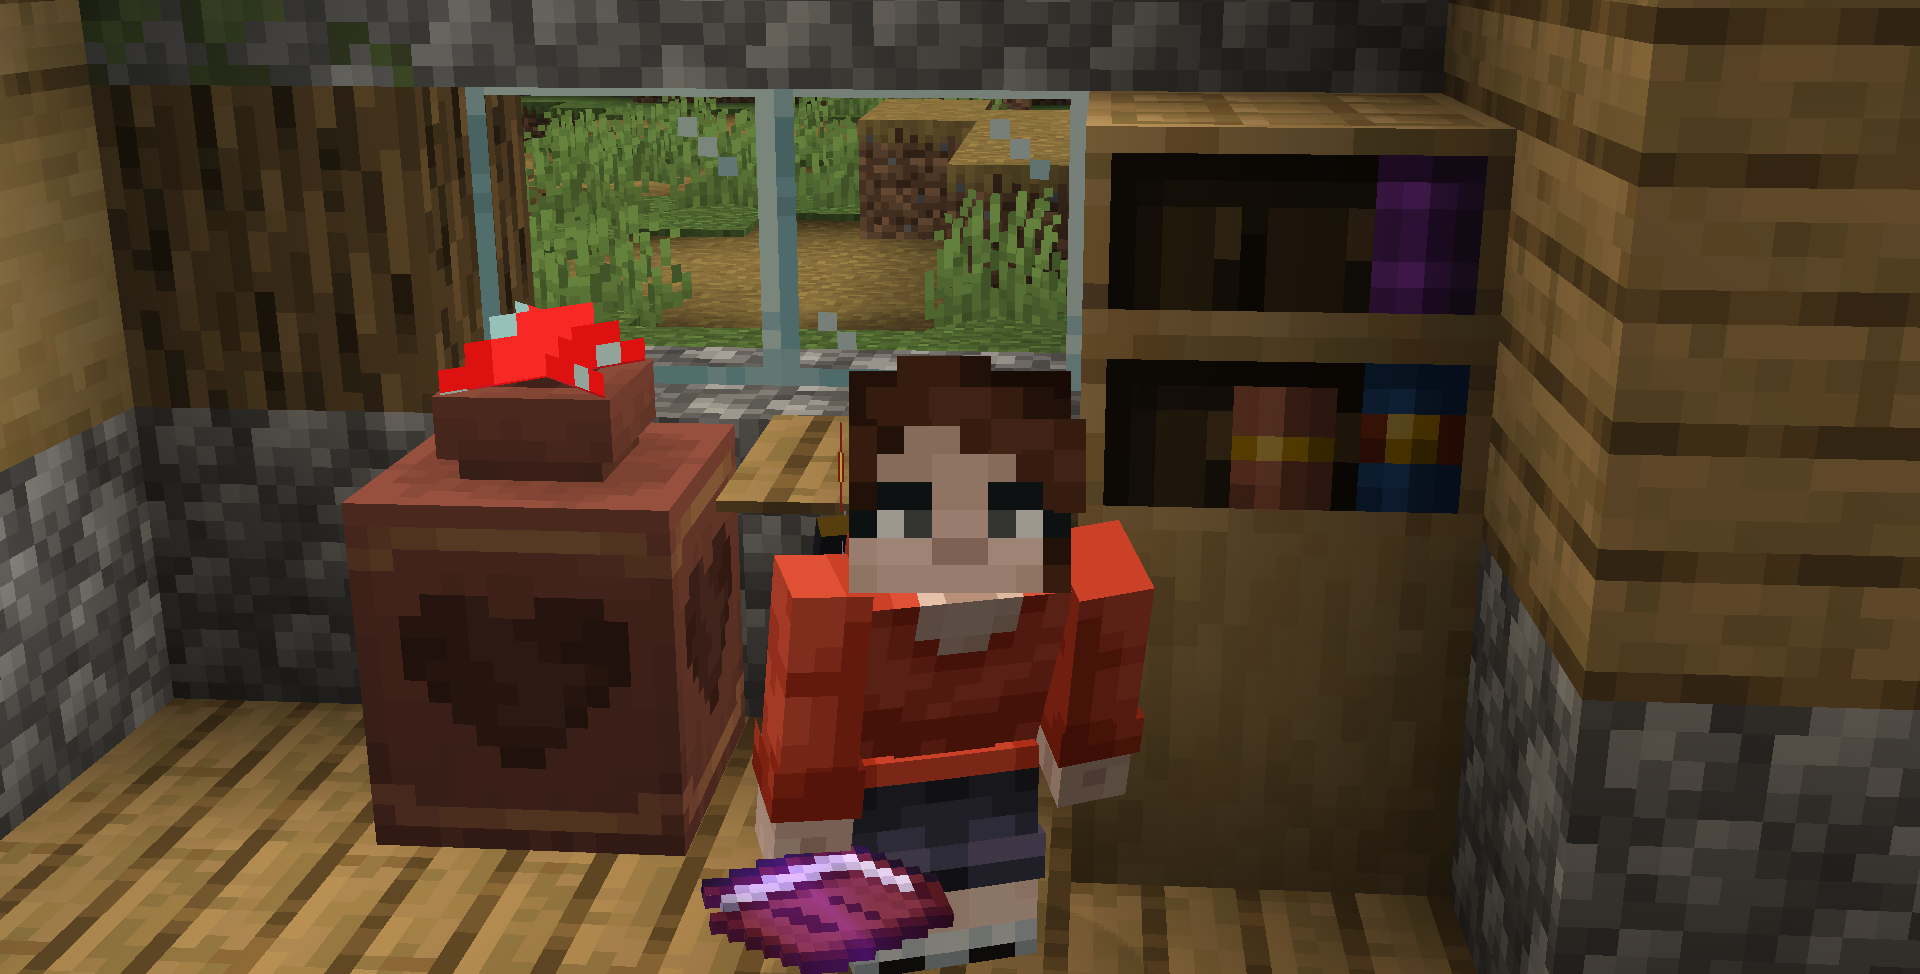 A minecraft player crouches and looks up at the camera. She's holding a written book, and standing next to a bookcase and a decorated heart-pattern pot with a mushroom inside.